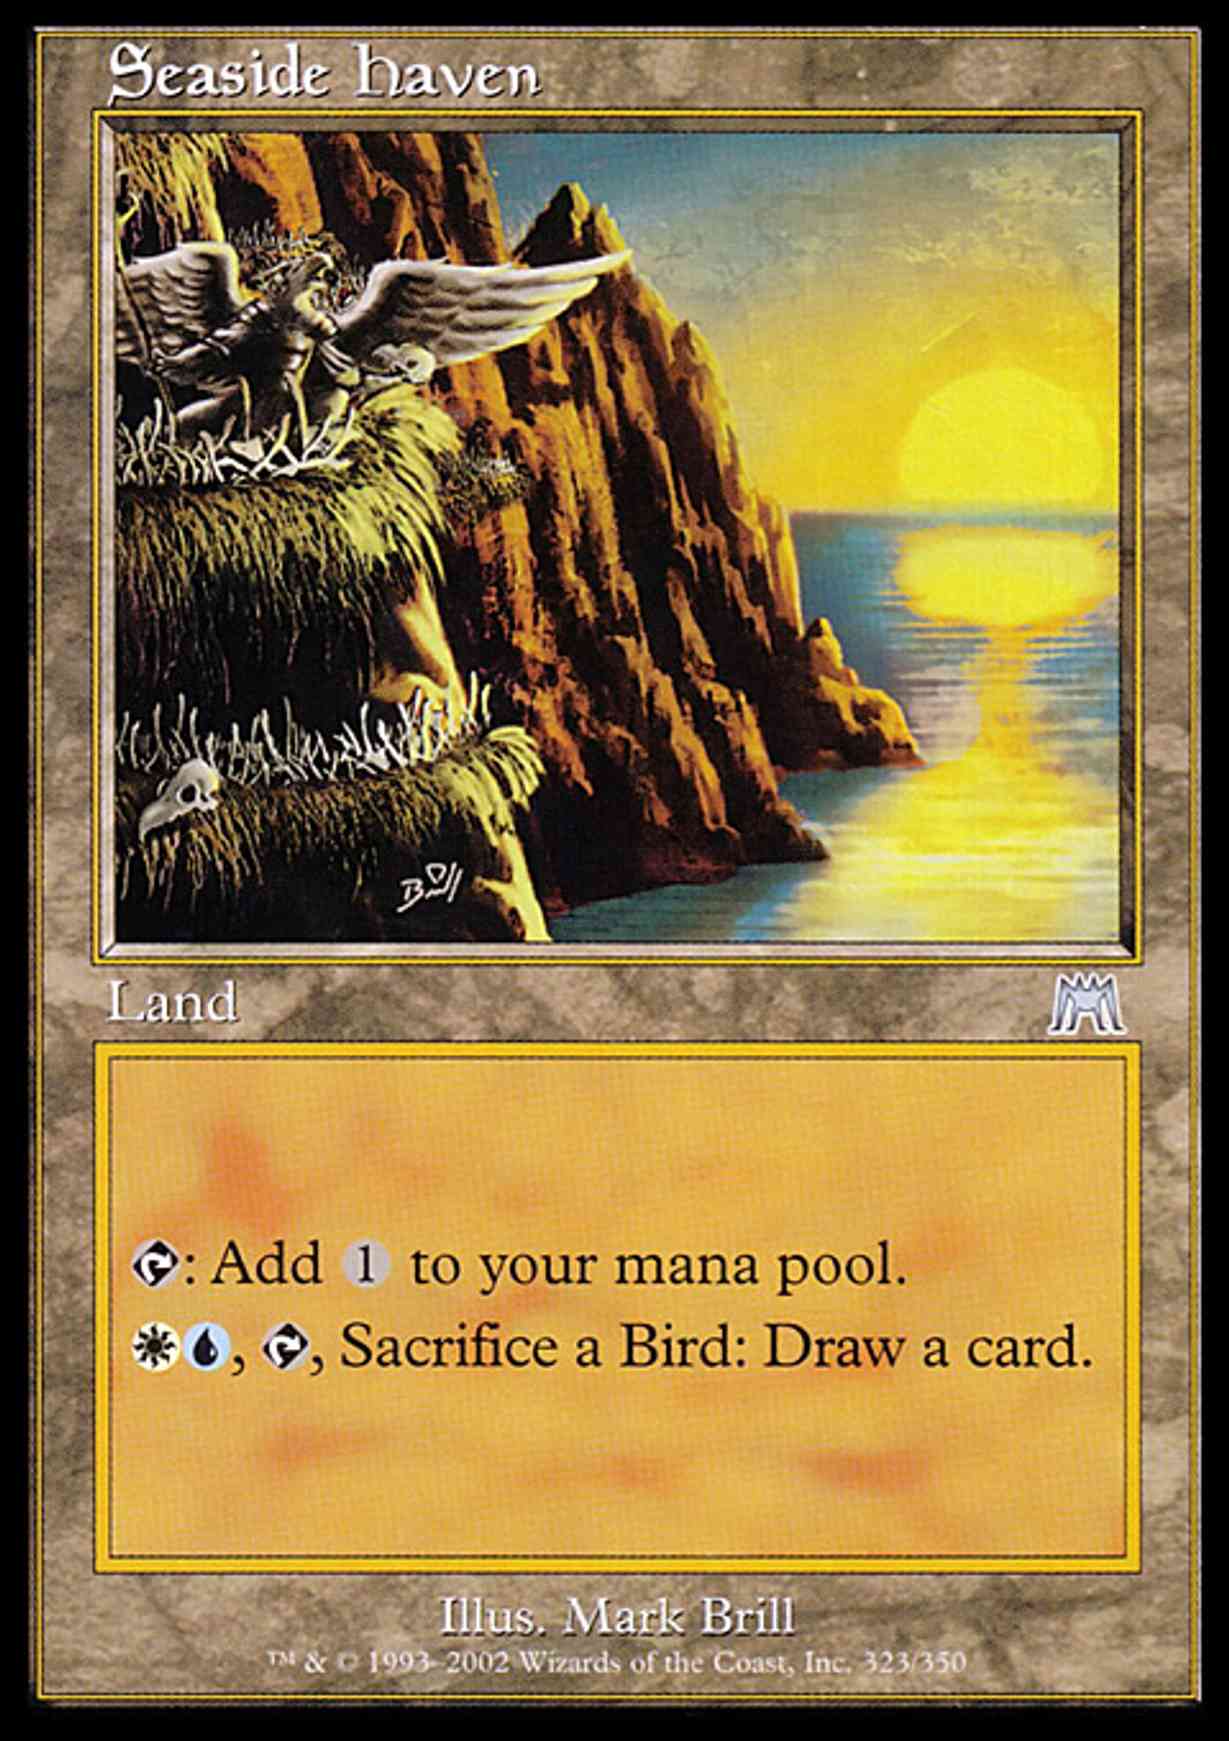 Seaside Haven magic card front